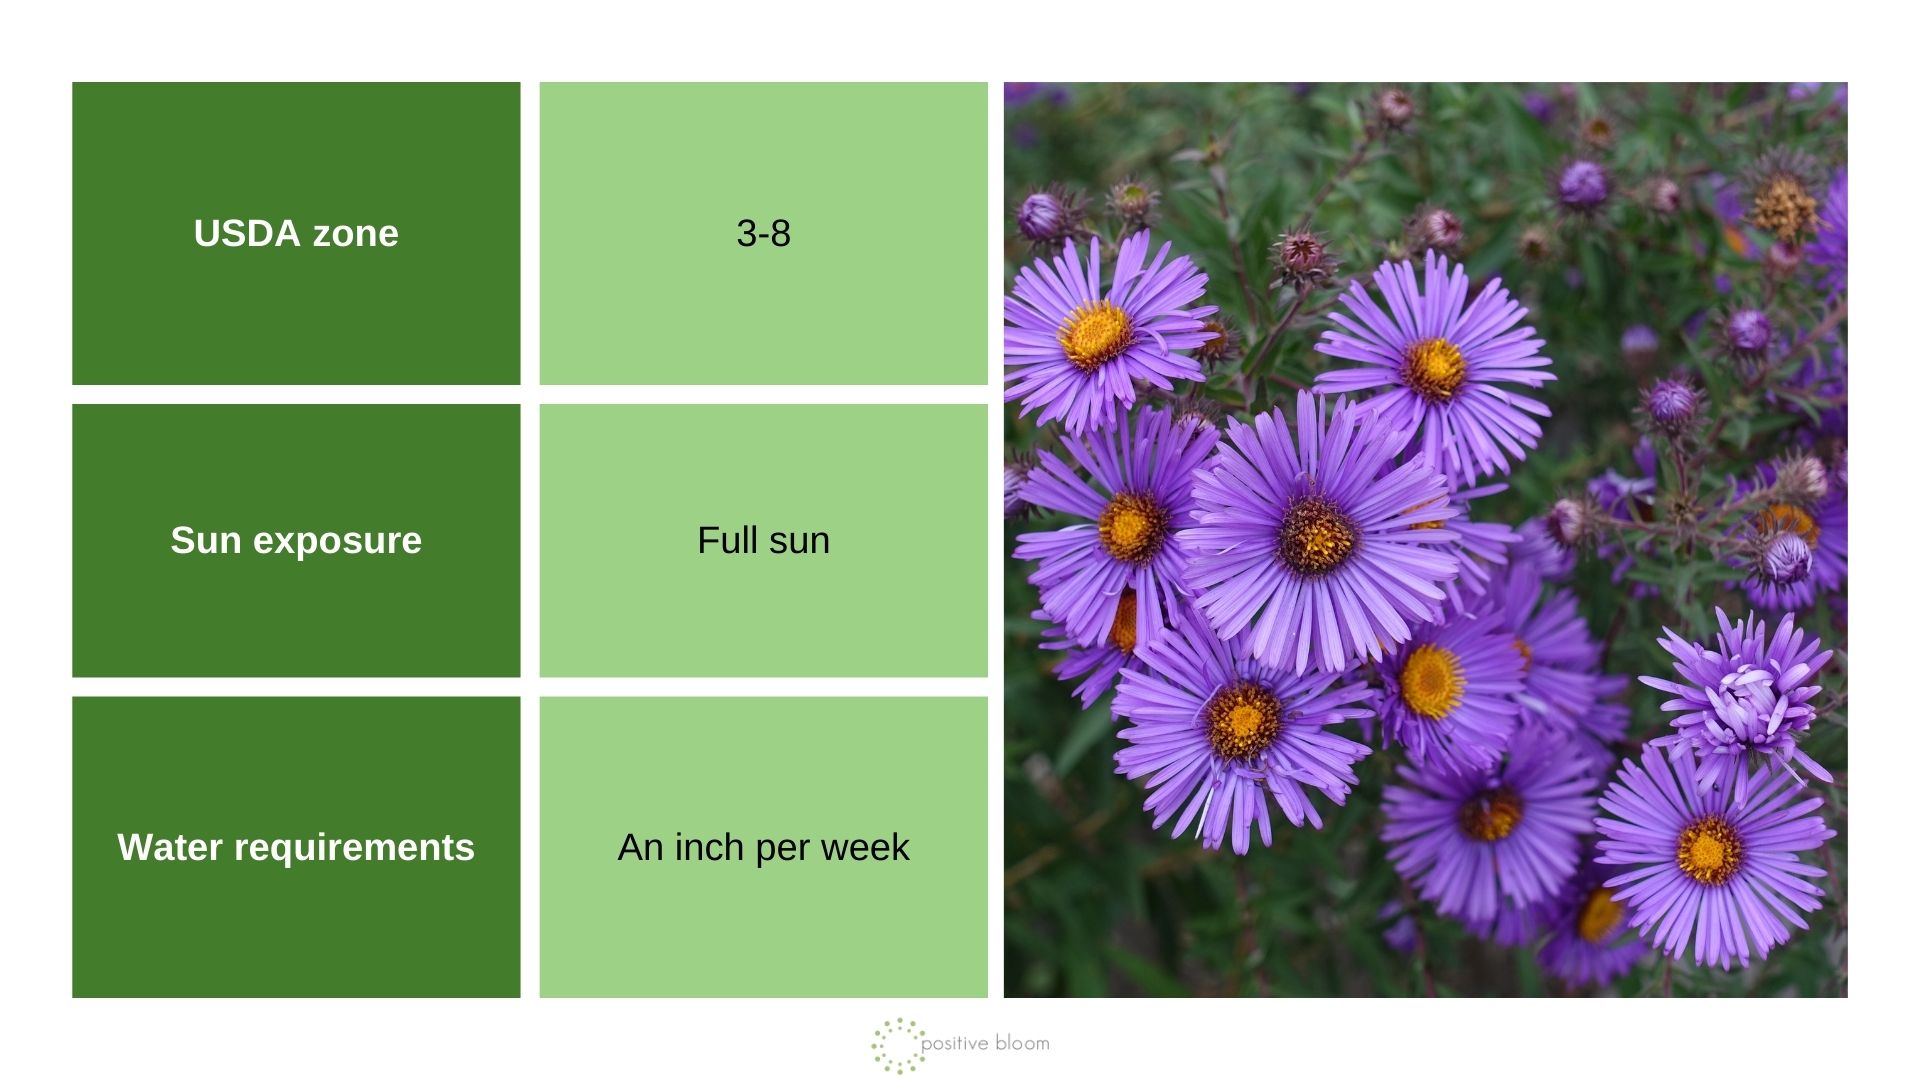 October Skies' aster info chart and photo